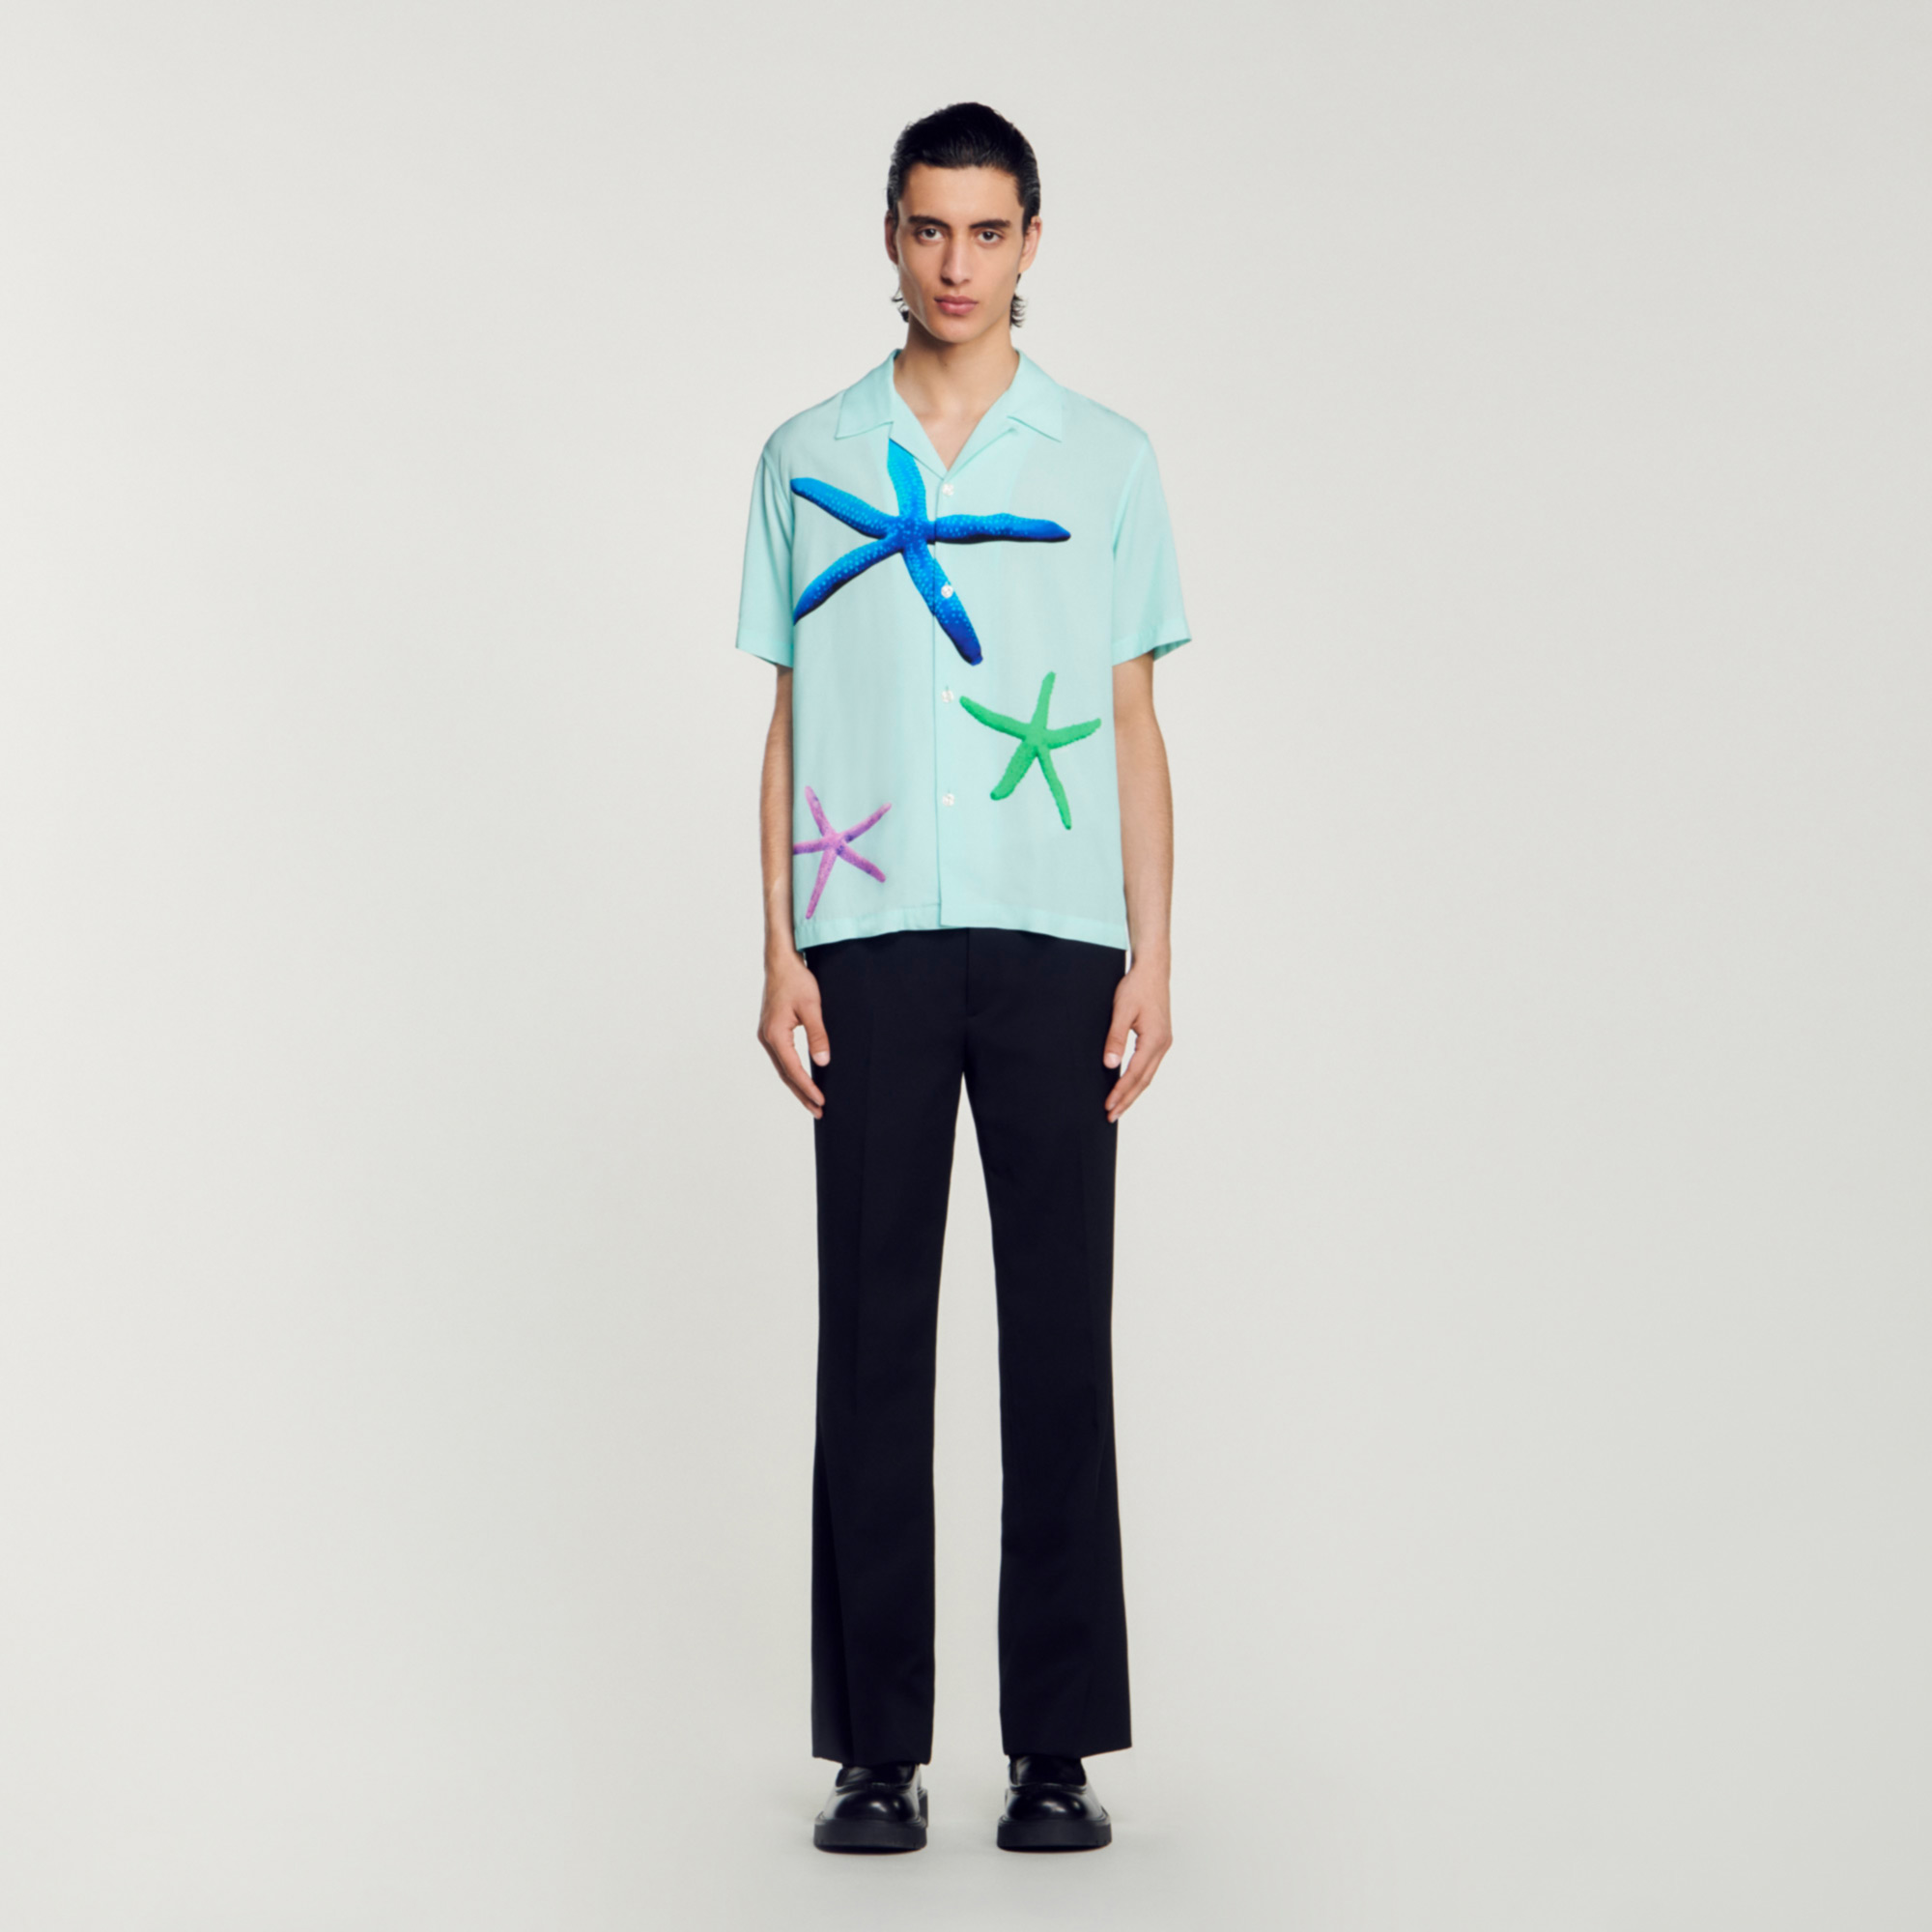 Sandro viscose Short-sleeve shirt with a button fastening, a spread collar, and embellished with a starfish print